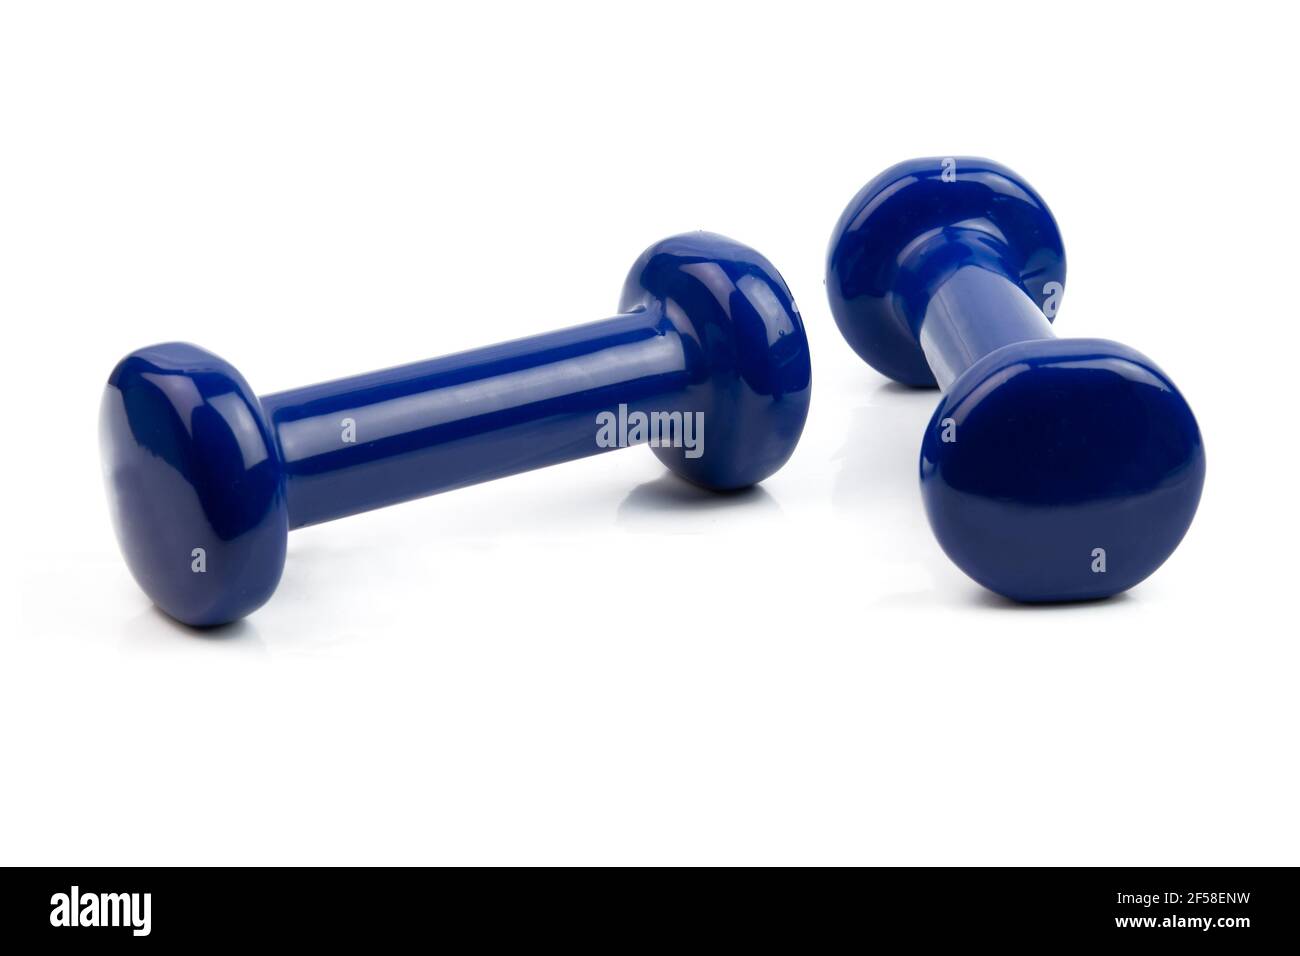 Blue dumbbell weights isolated on white with soft shadow Stock Photo